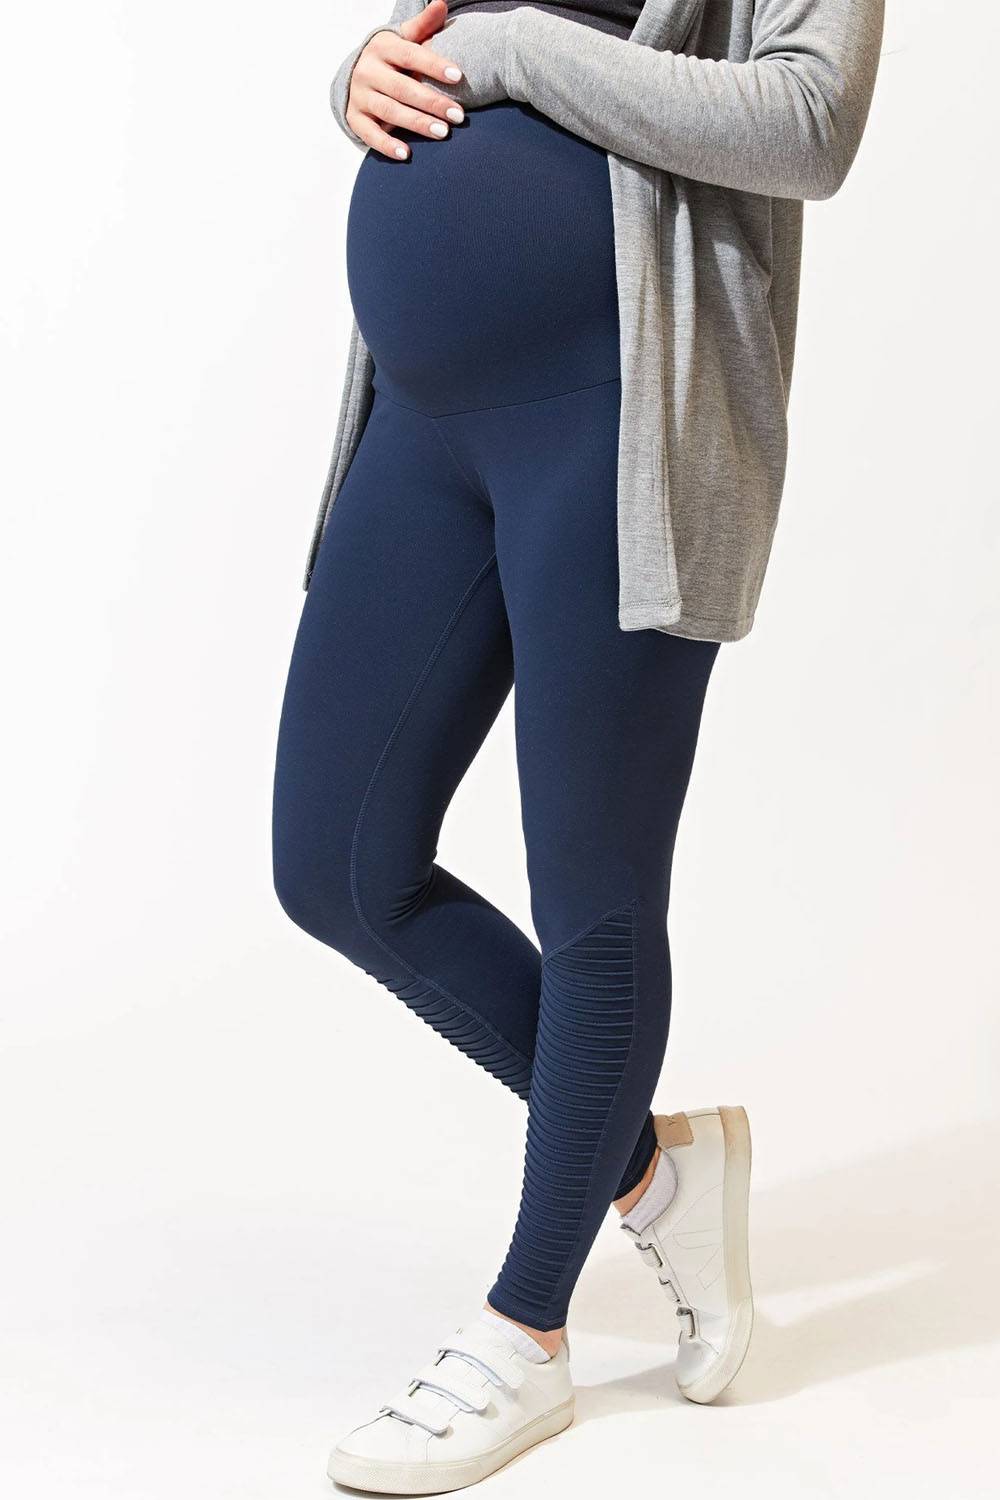 threads 4 thought maternity leggings